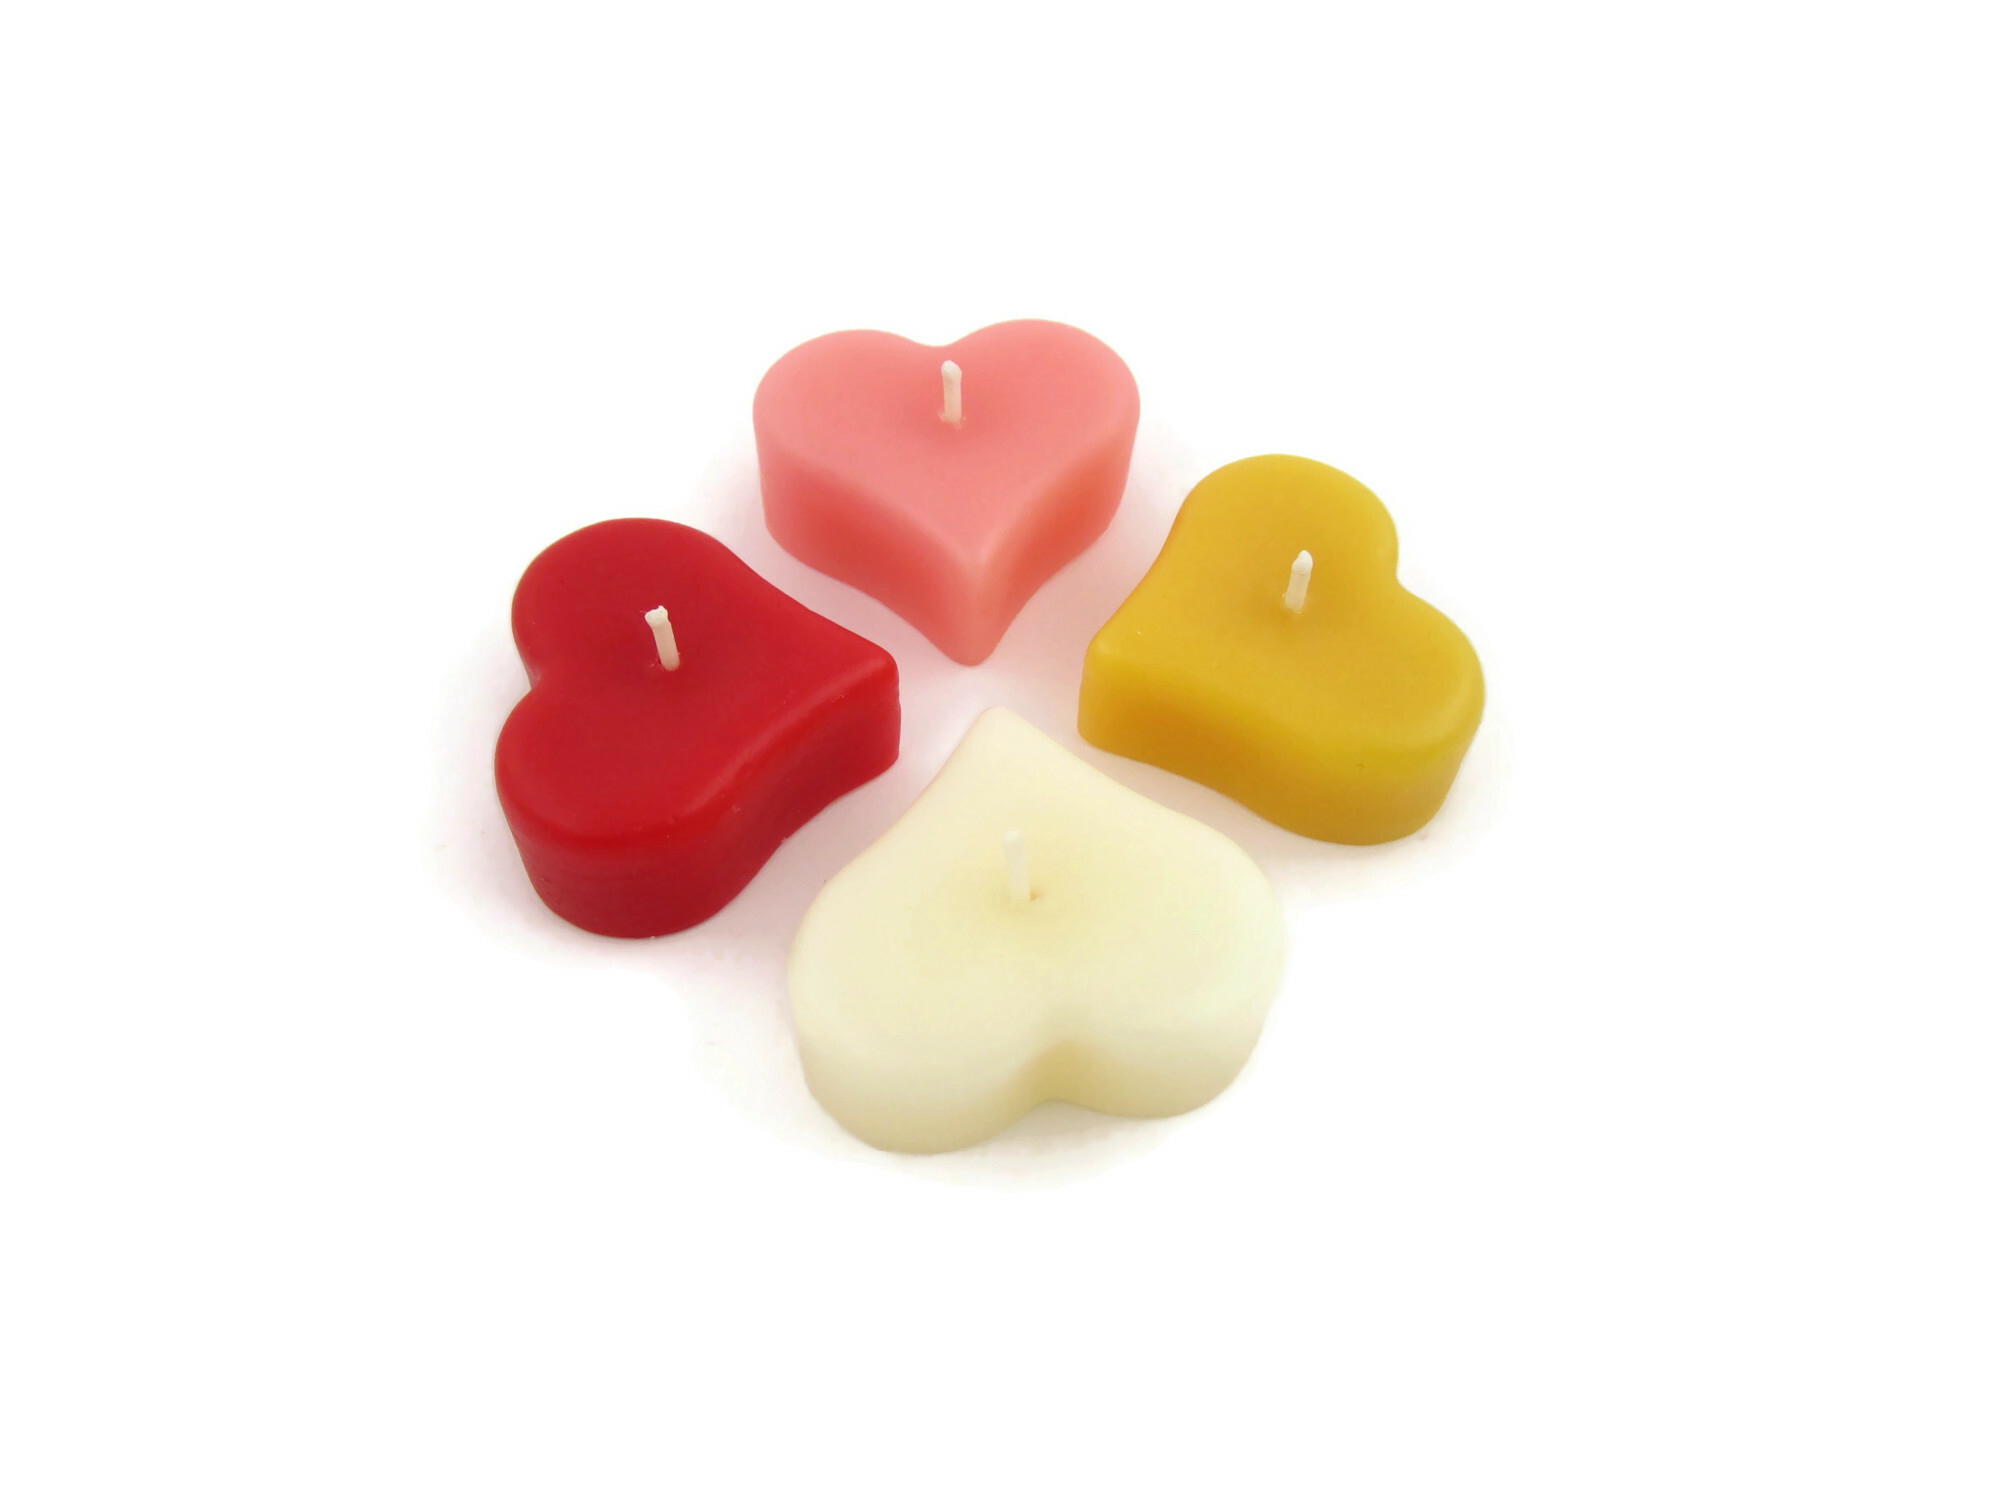 Beeswax Floating Candles  Set of 4 Floating Heart Candles